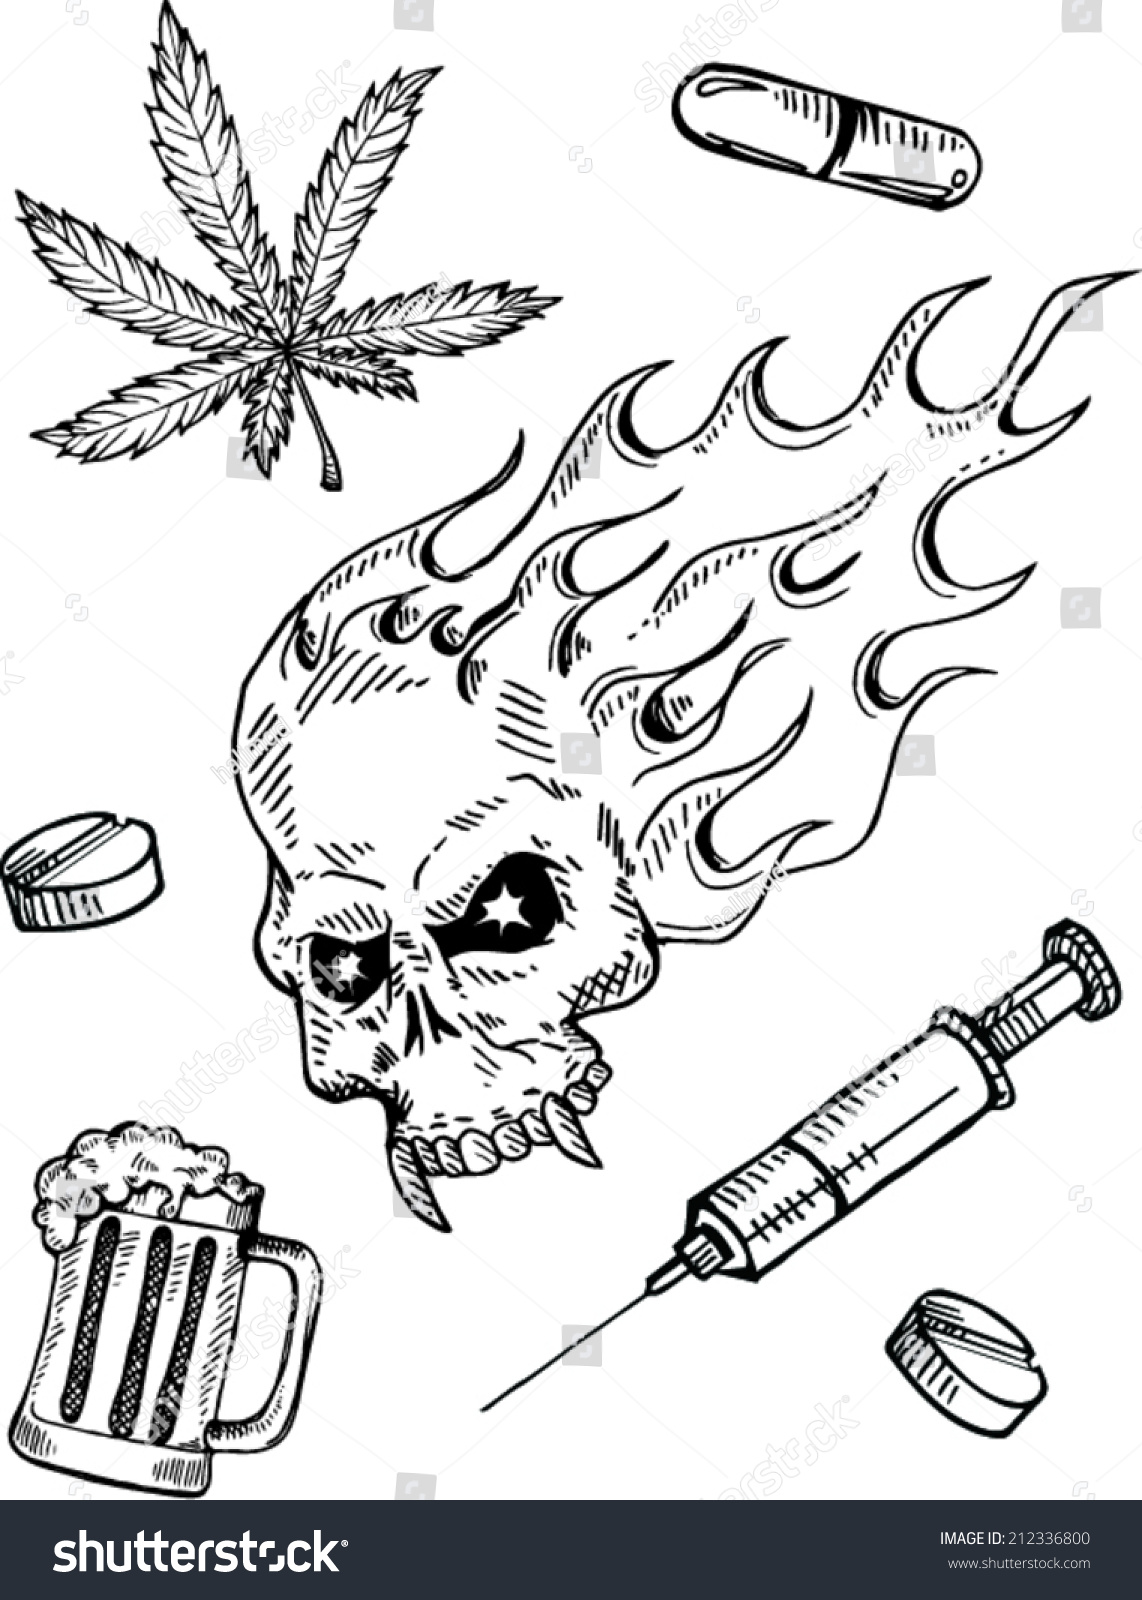 Narcotic Drugs Doodle Style Vector Illustration Stock Vector 212336800 ...